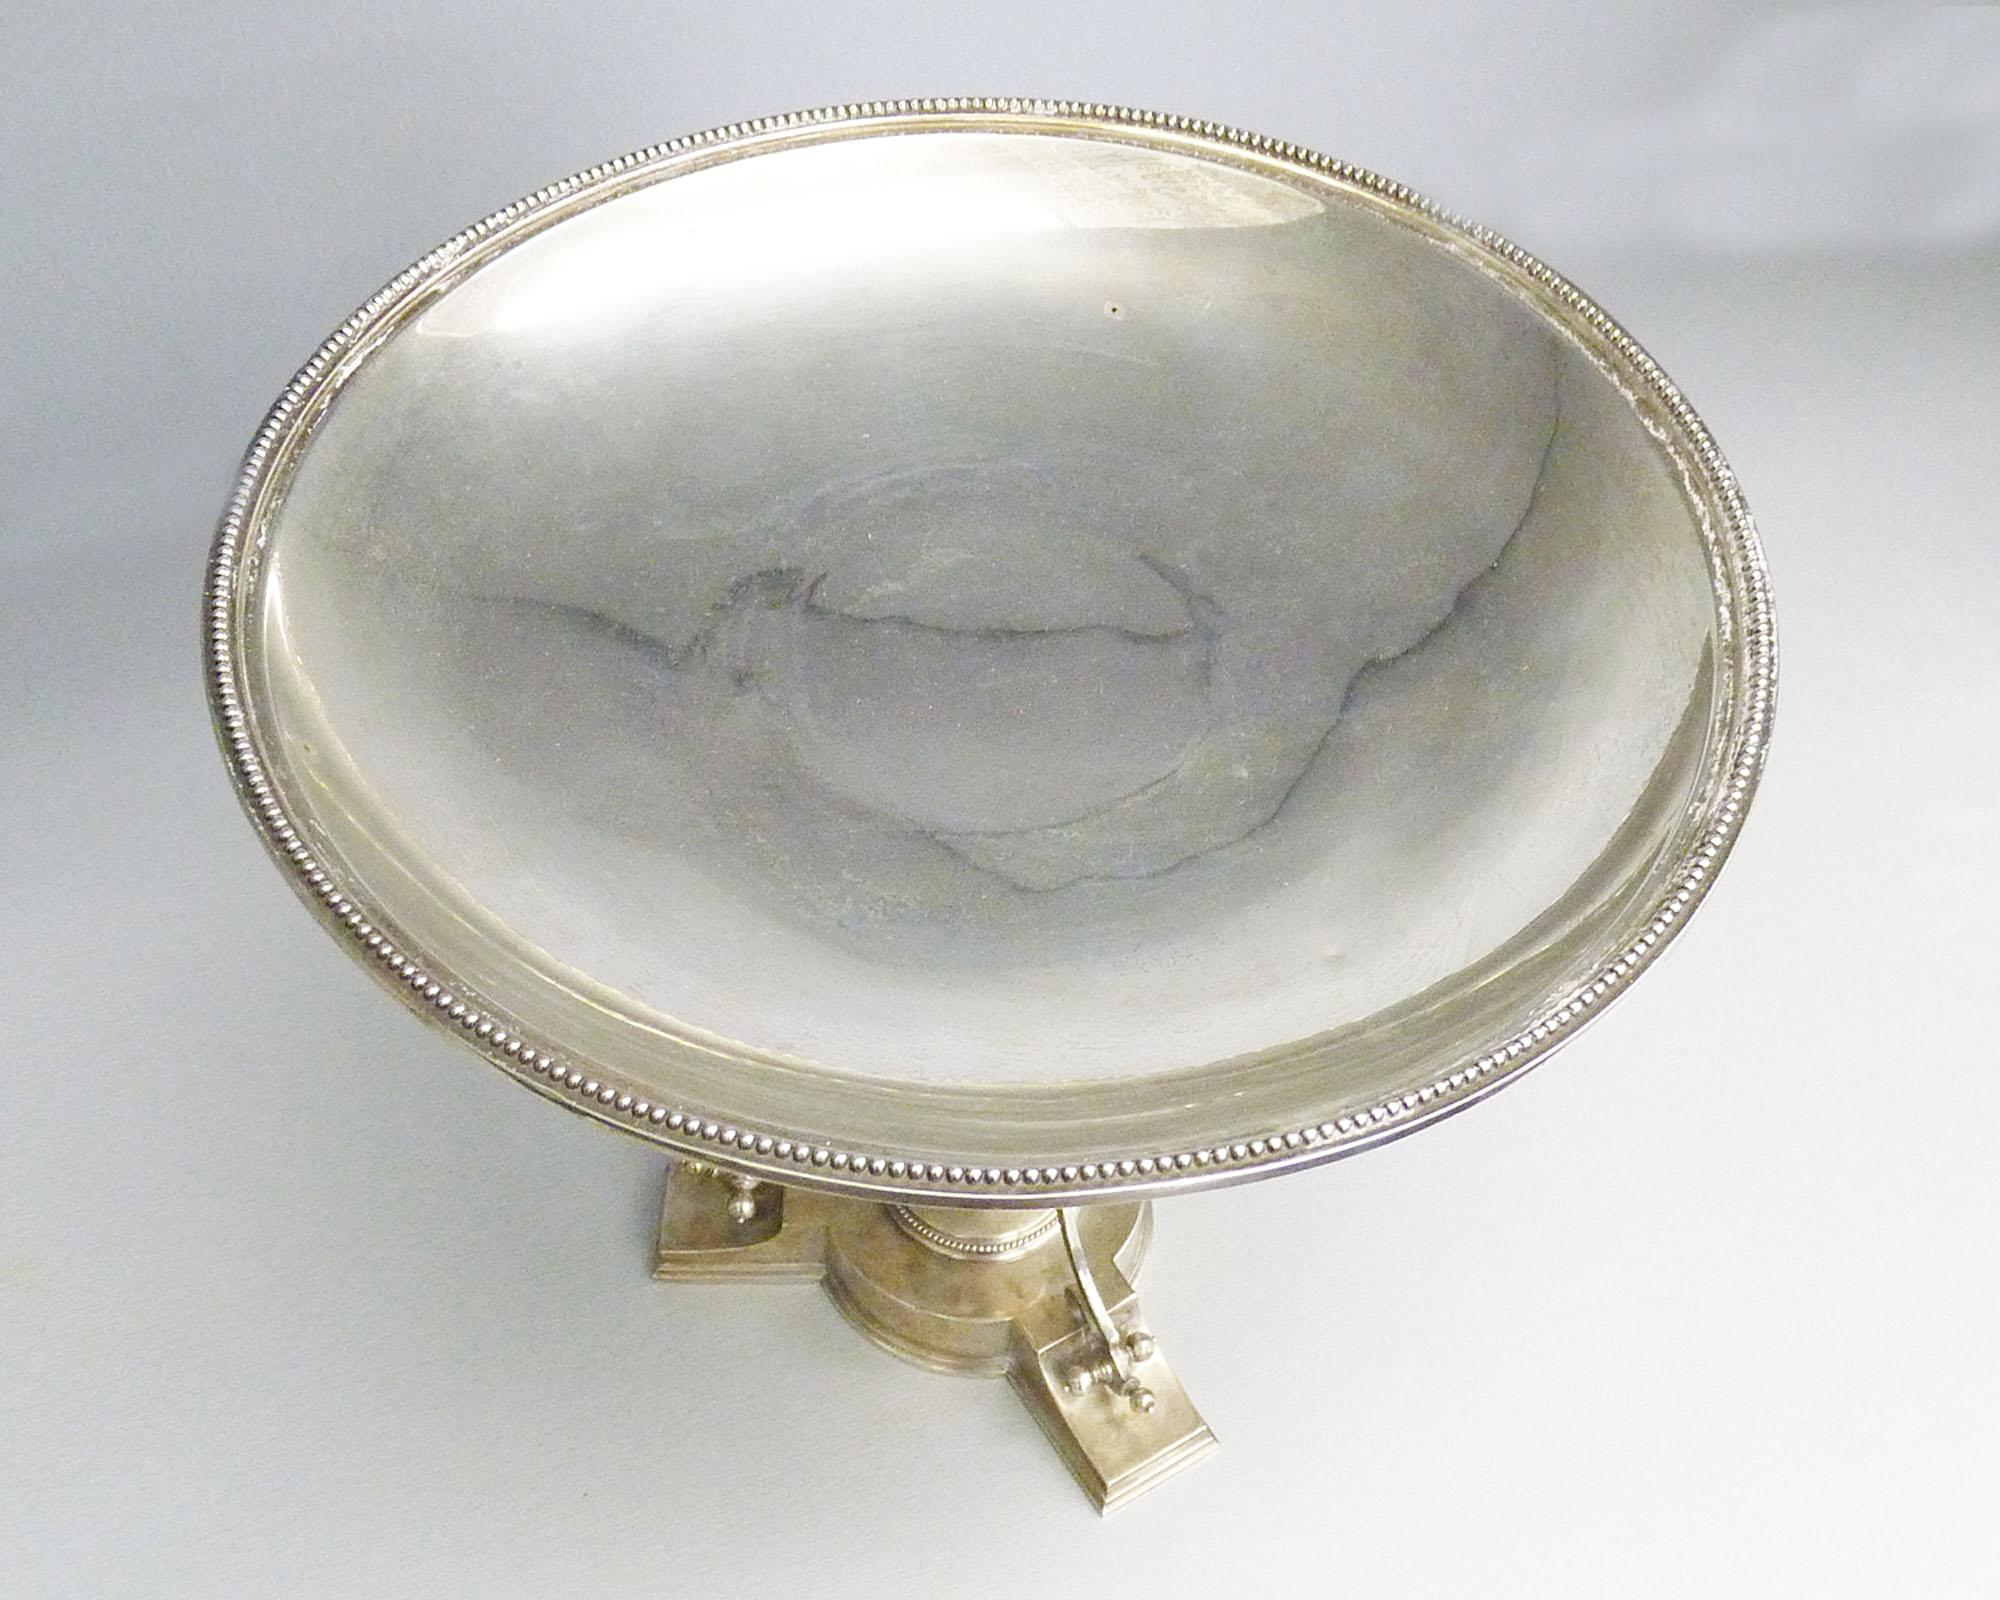 Stylish sterling silver fruit stand made by Tiffany & Co. in New York in approximately 1930s. 
Signed Tiffany & Co. 30
New York 
925 sterling

